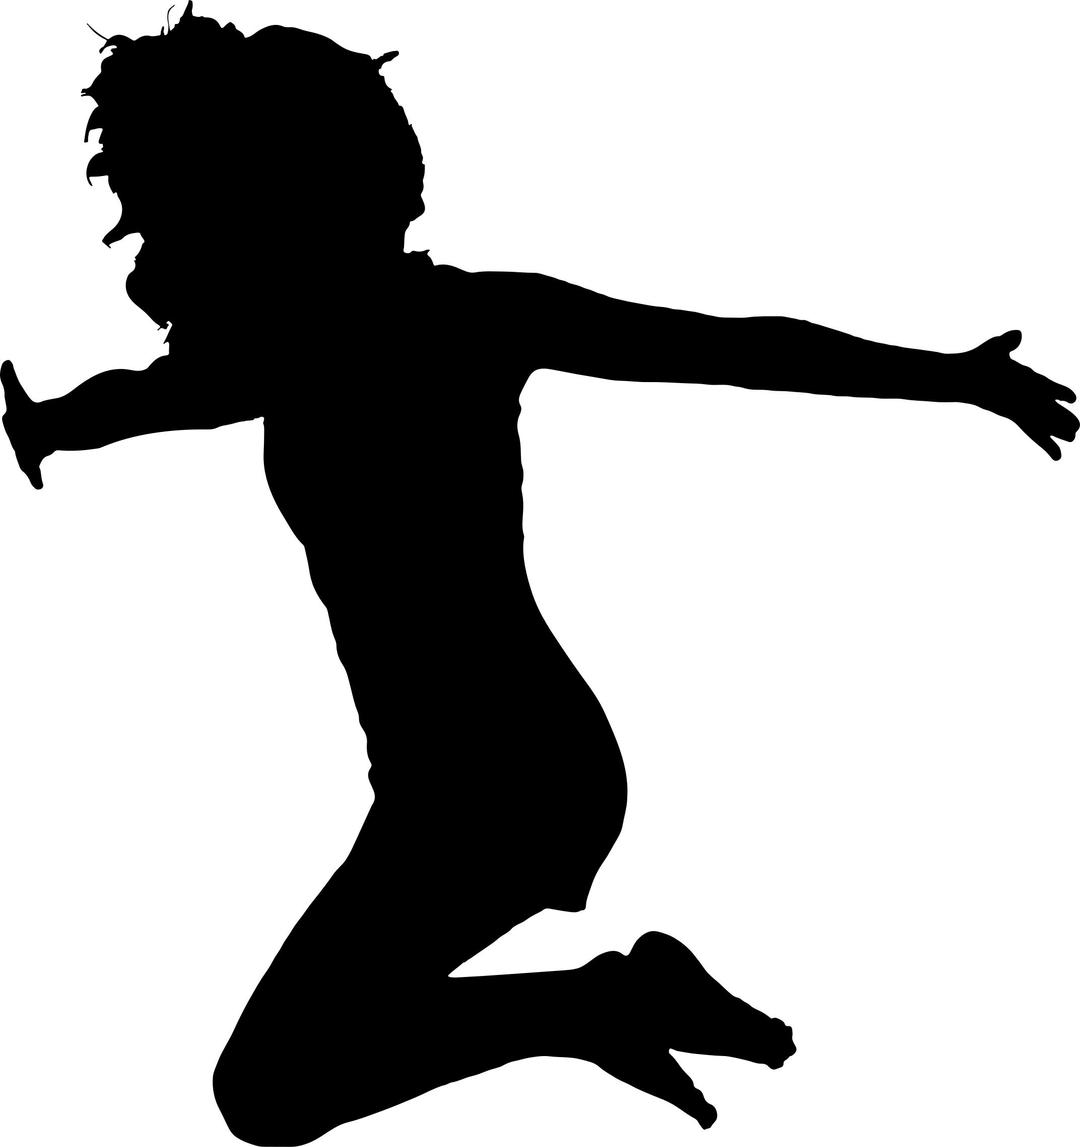 Woman Jumping For Joy Silhouette png transparent